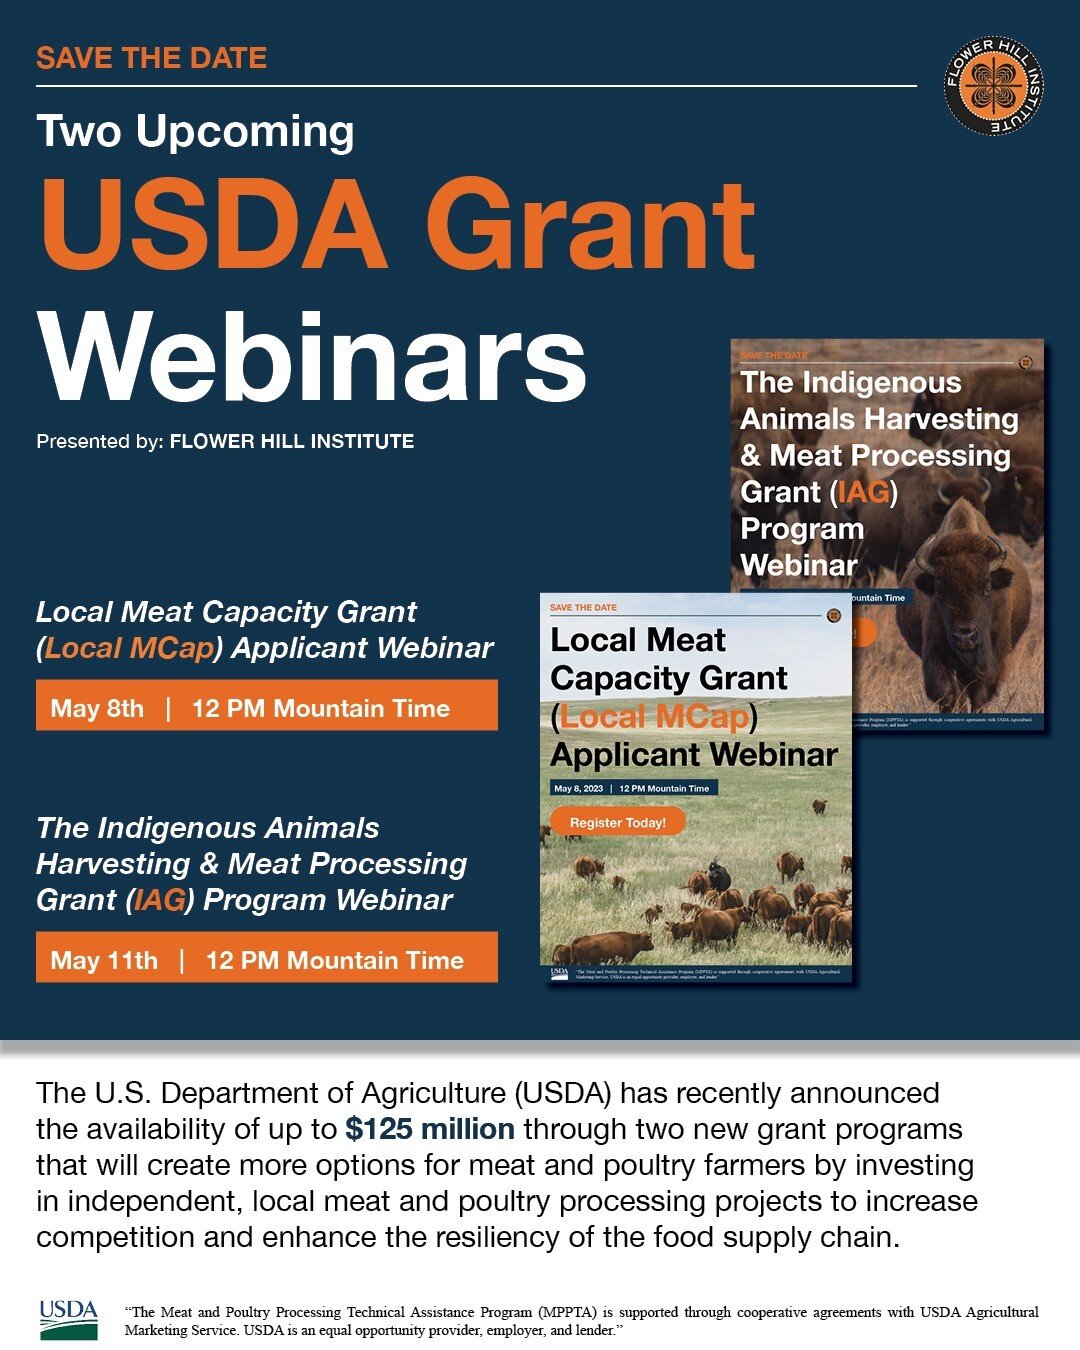 Flower Hill Institute is excited to announce two upcoming webinars for the new USDA Local Meat Capacity Grant (Local MCap) program and the Indigenous Animals Harvesting and Meat Processing Grant (IAG).

Both webinars will provide a general overview o